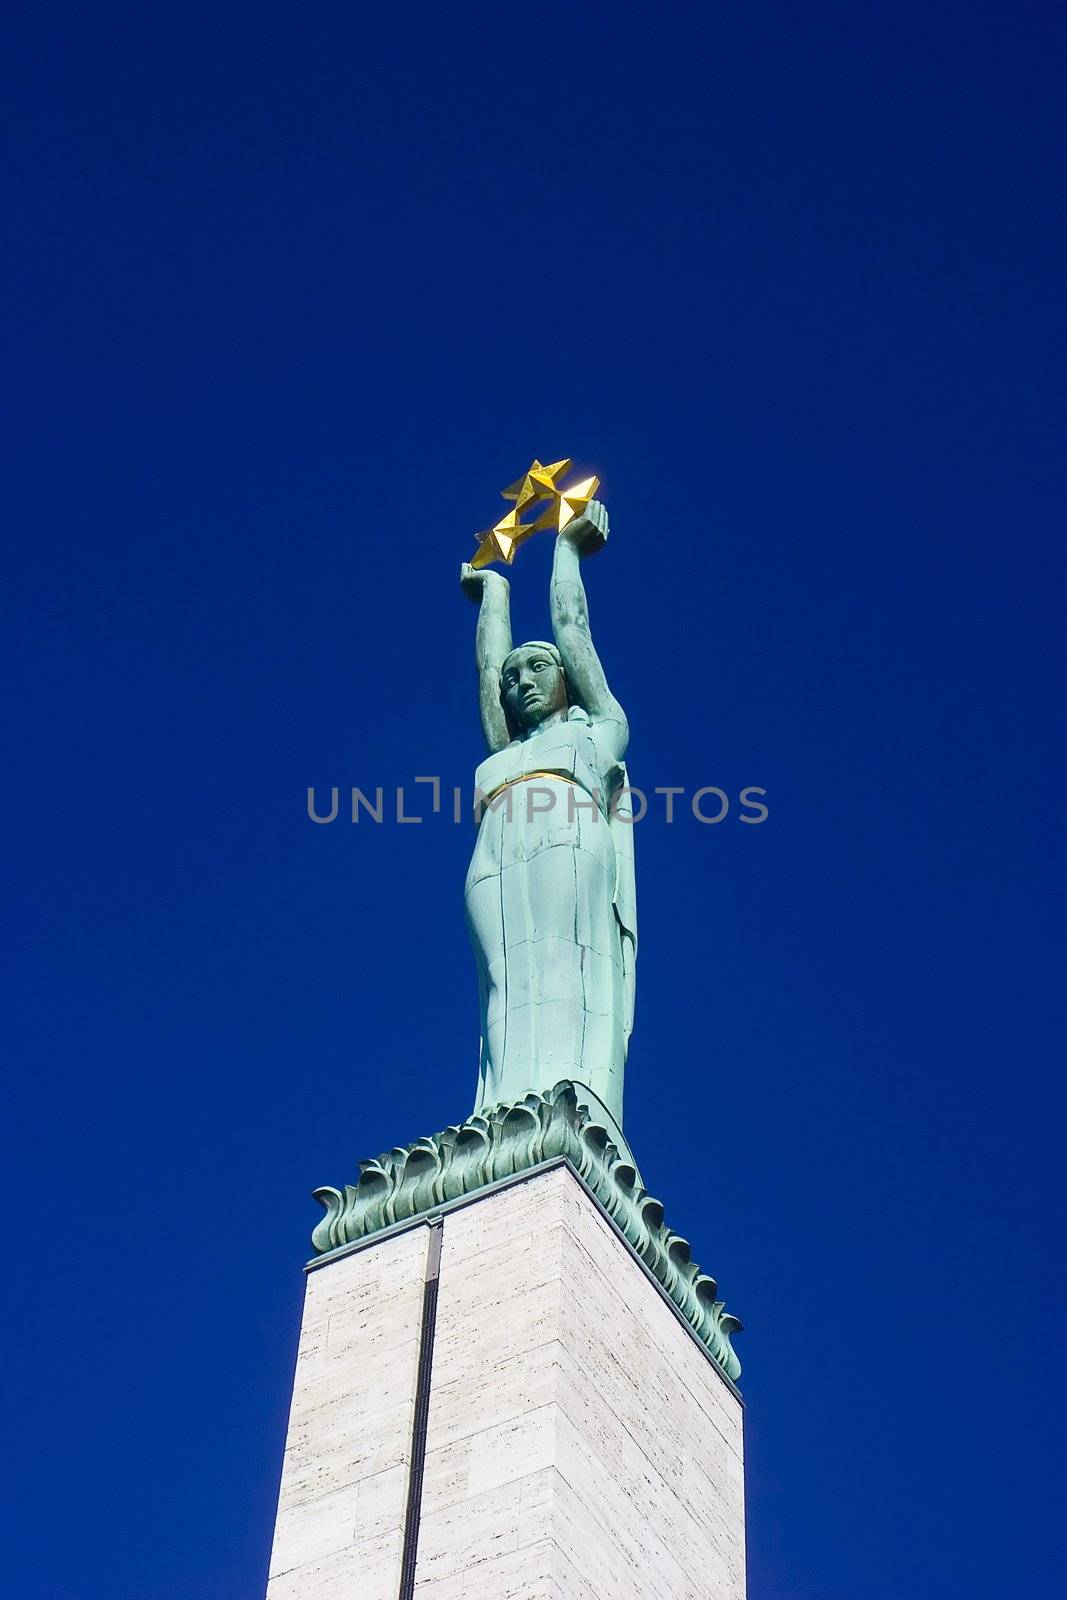 Top part of Monument of Freedom in Riga - copper statue of a woman holding three gold stars which symbolise three regions of Latvia. Main idea of this monument is "To Fatherland and Freedom"